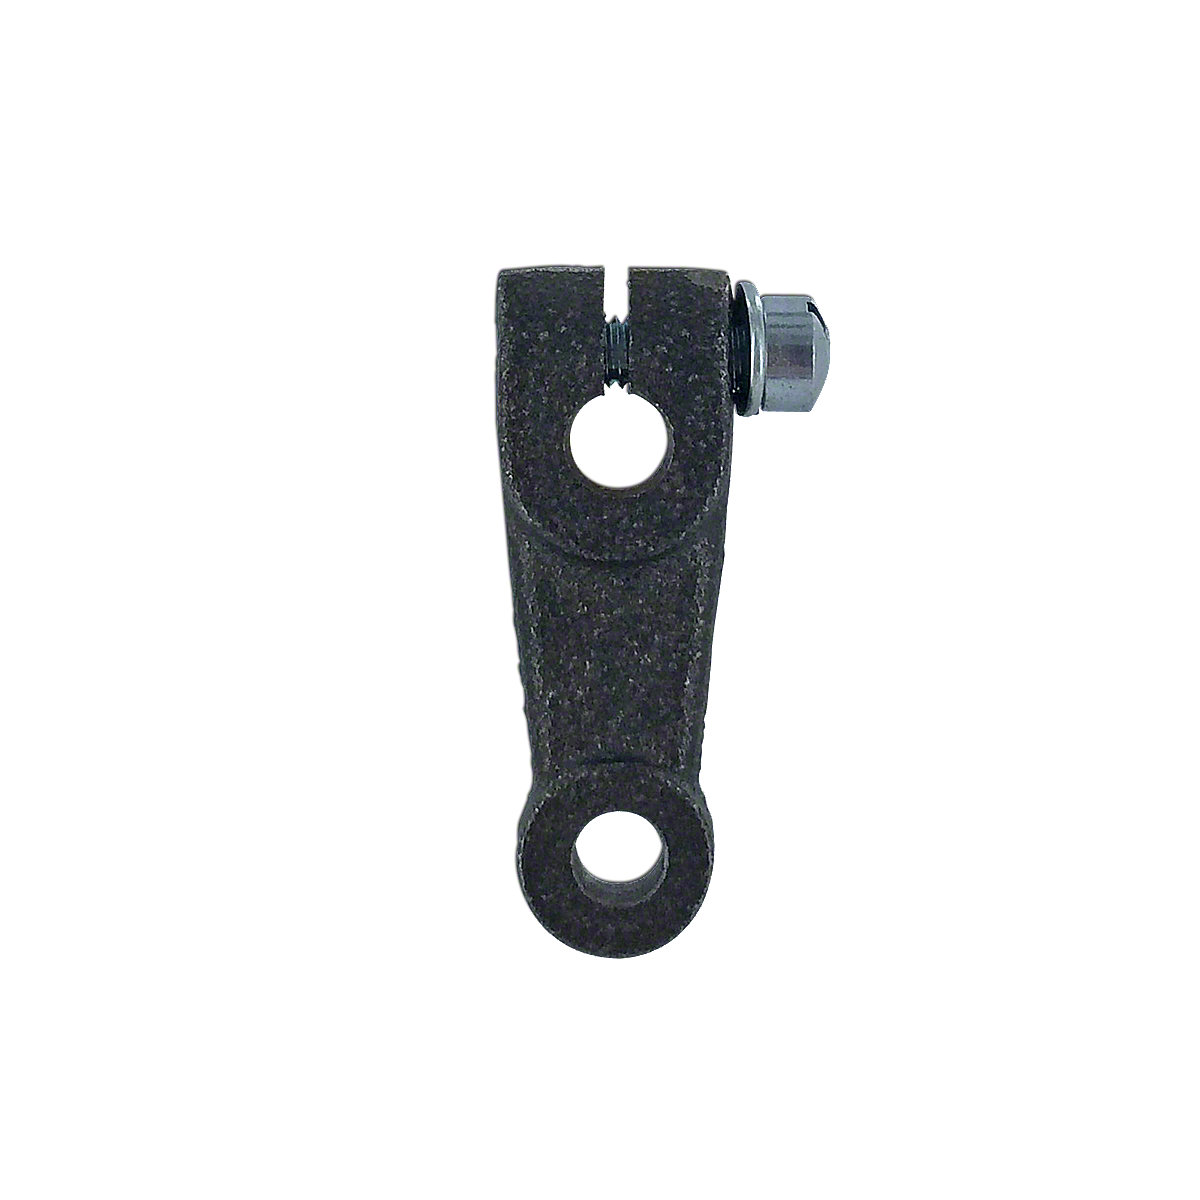 Choke Lever with Screw